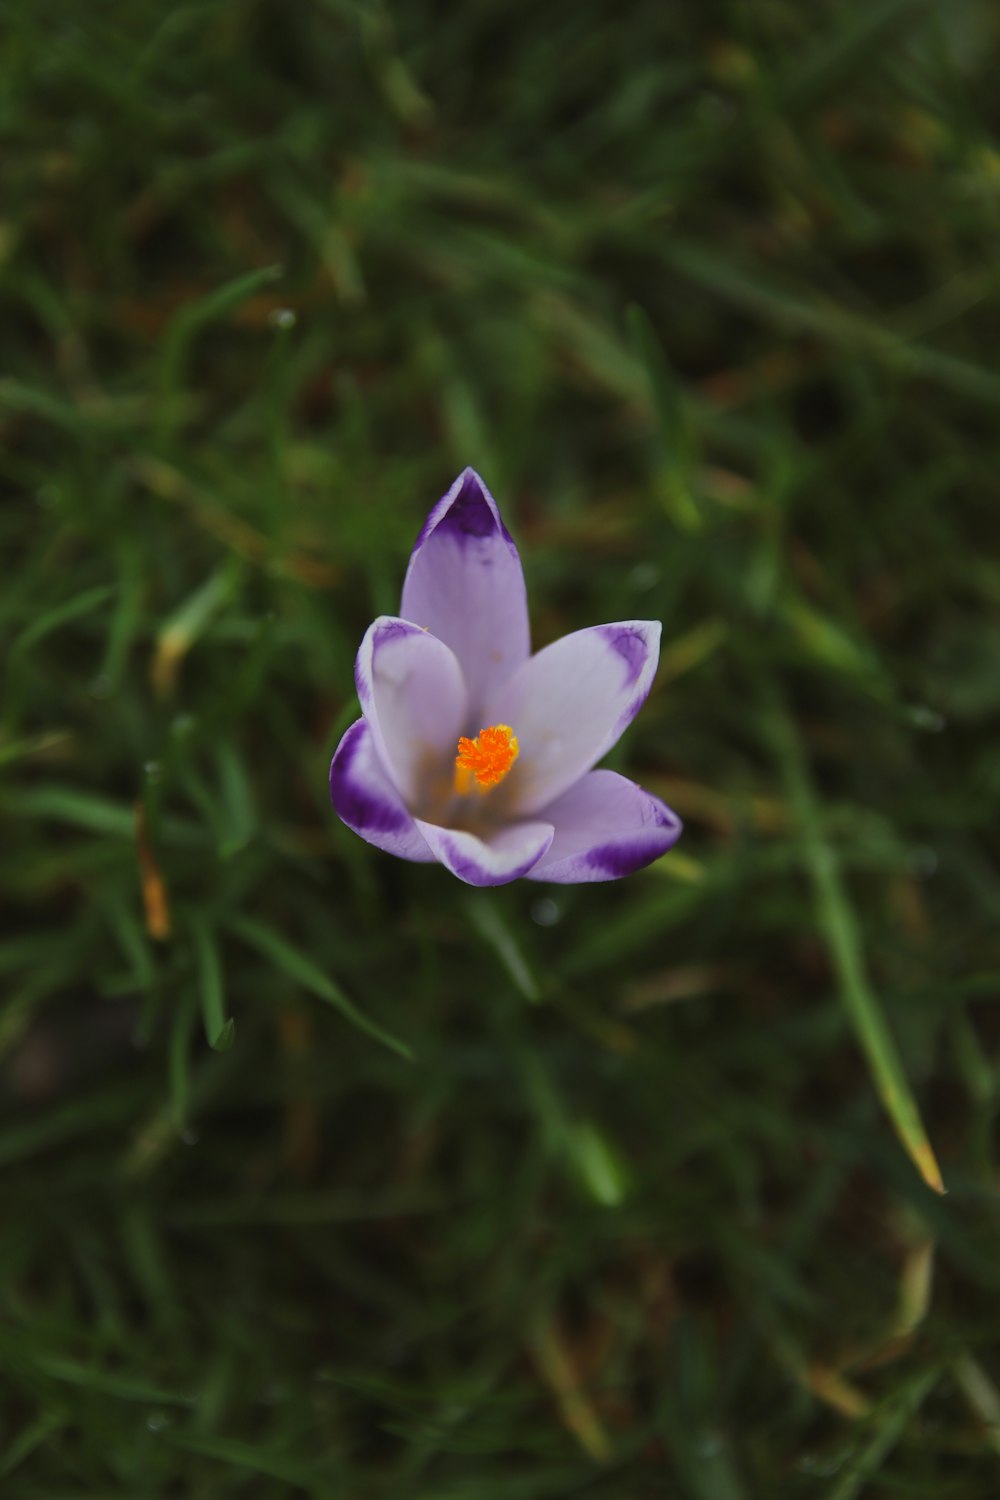 a purple and white flower sitting in the grass